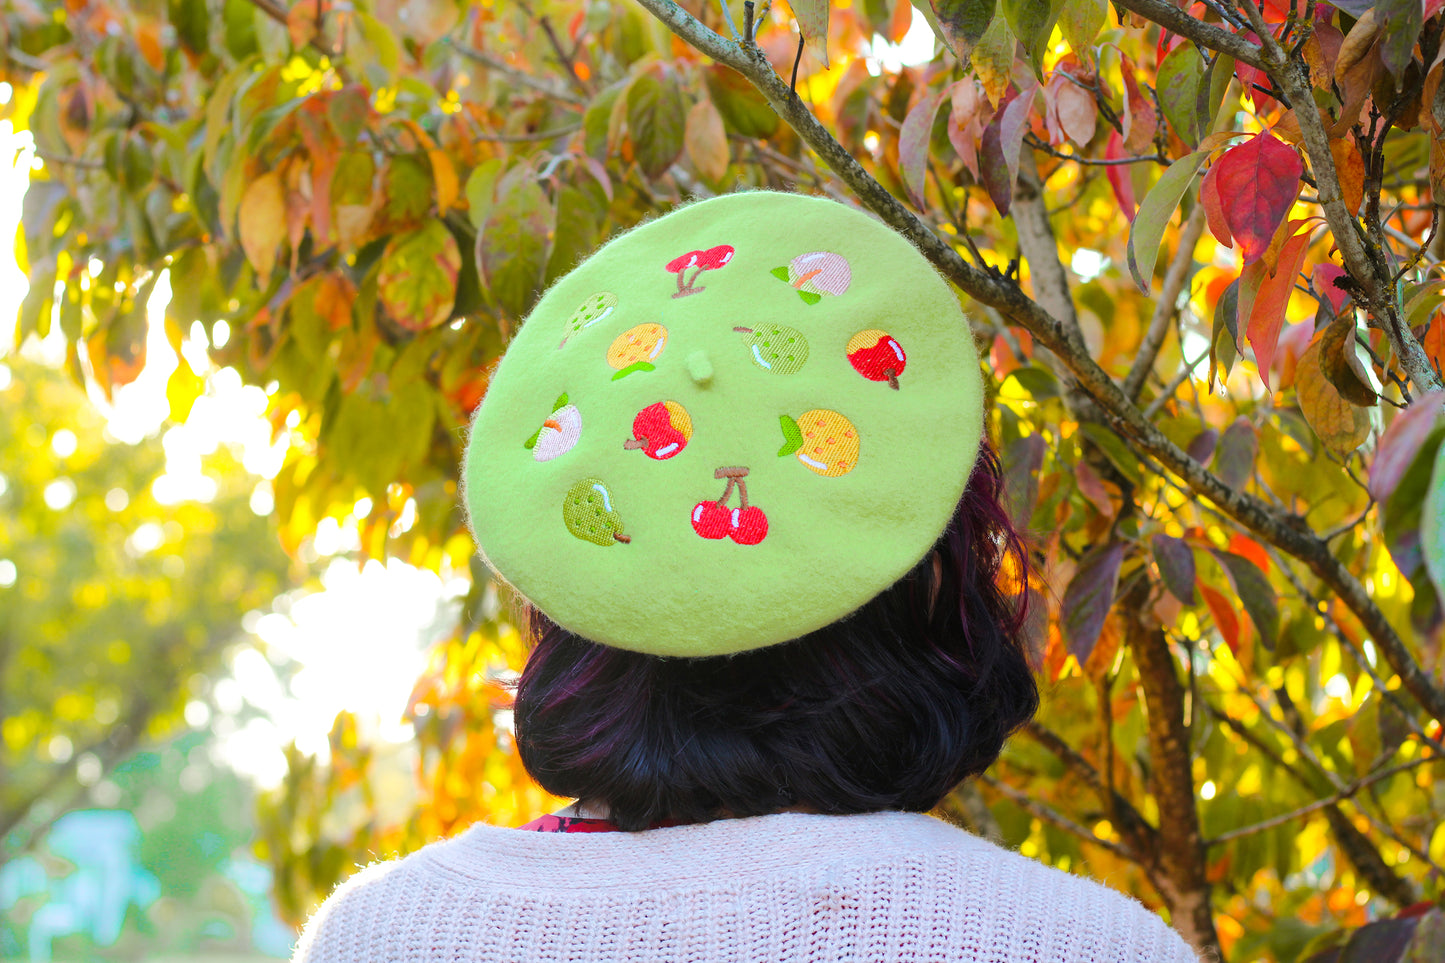 Animal Crossing Fruits Embroidered Beret!